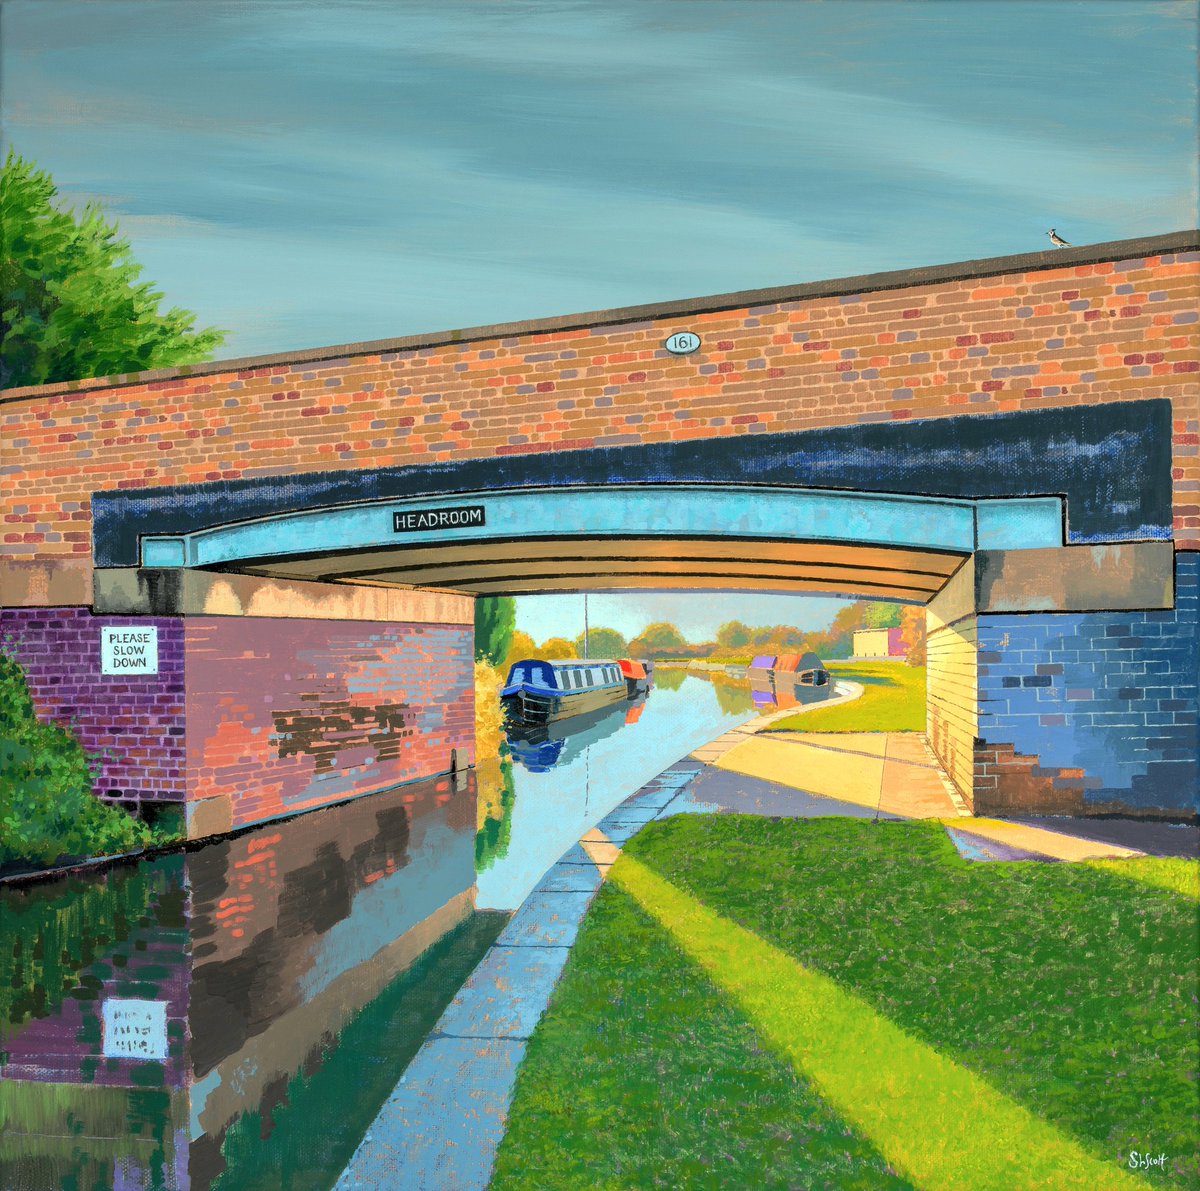 HEADROOM Acrylic painting This new piece will be on display ready for the opening of Drift Art Gallery, Nantwich #Cheshire The signage on the canal bridge speaks for itself, & it reminded me whilst I was painting it, to stop thinking and just paint! #cheshirelife #artgallery